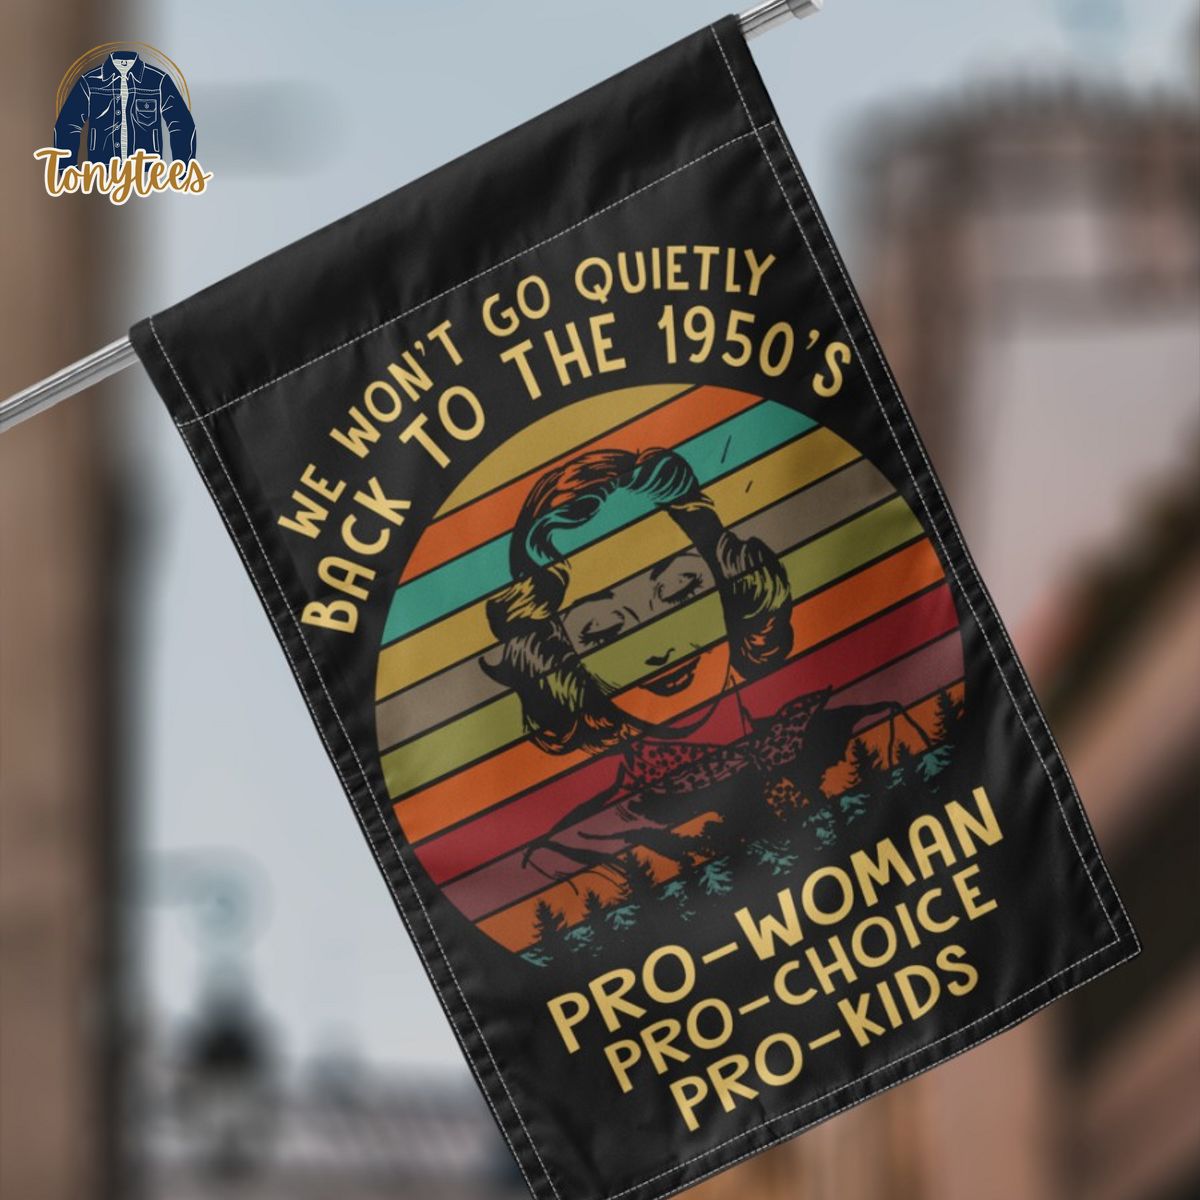 We won’t go quietly back to the 1950’s pro-woman pro-choice pro-kids flag